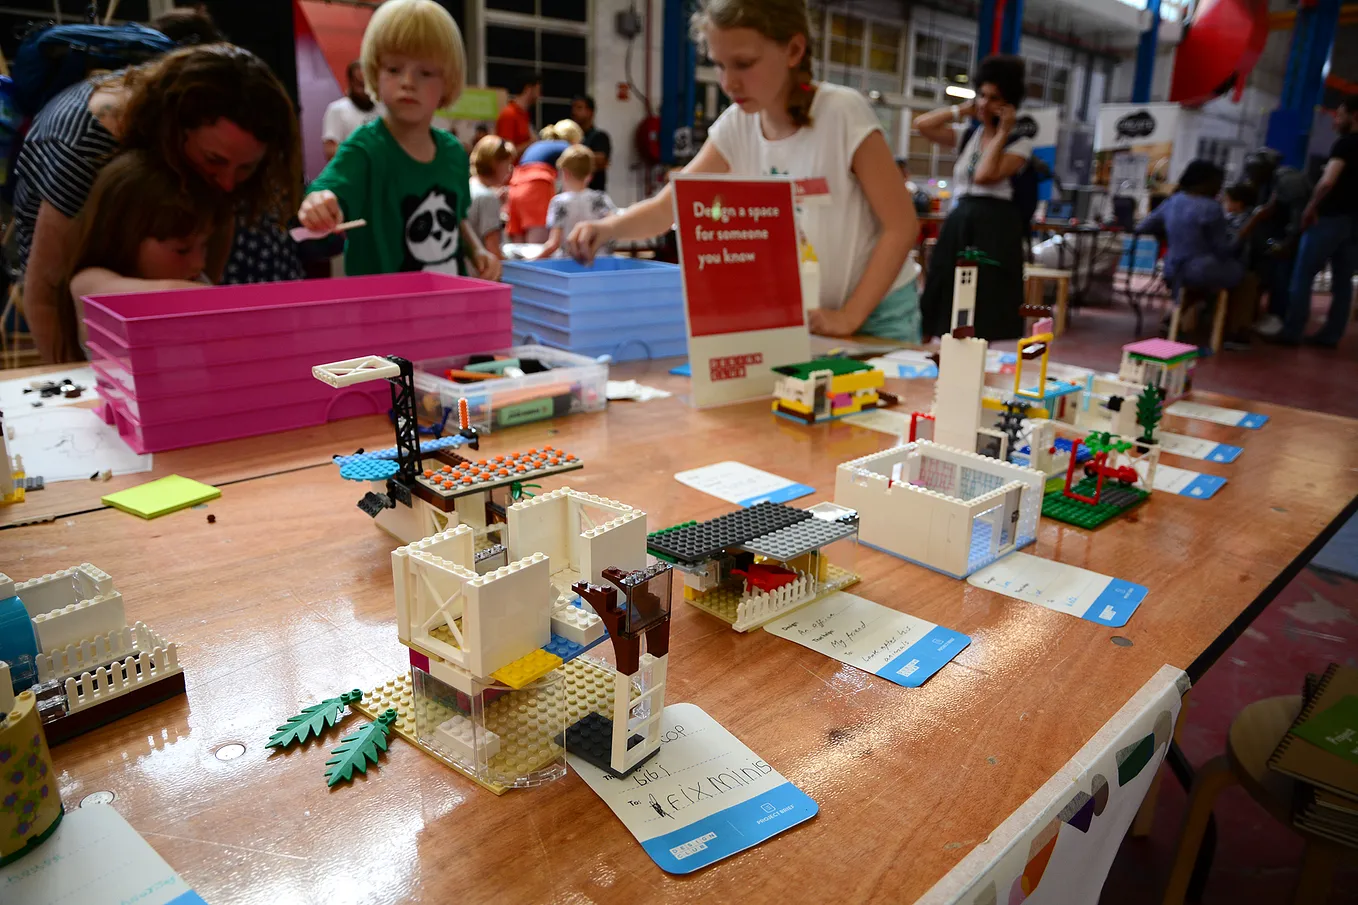 Using Lego and Design Thinking to help children build user-centred spaces